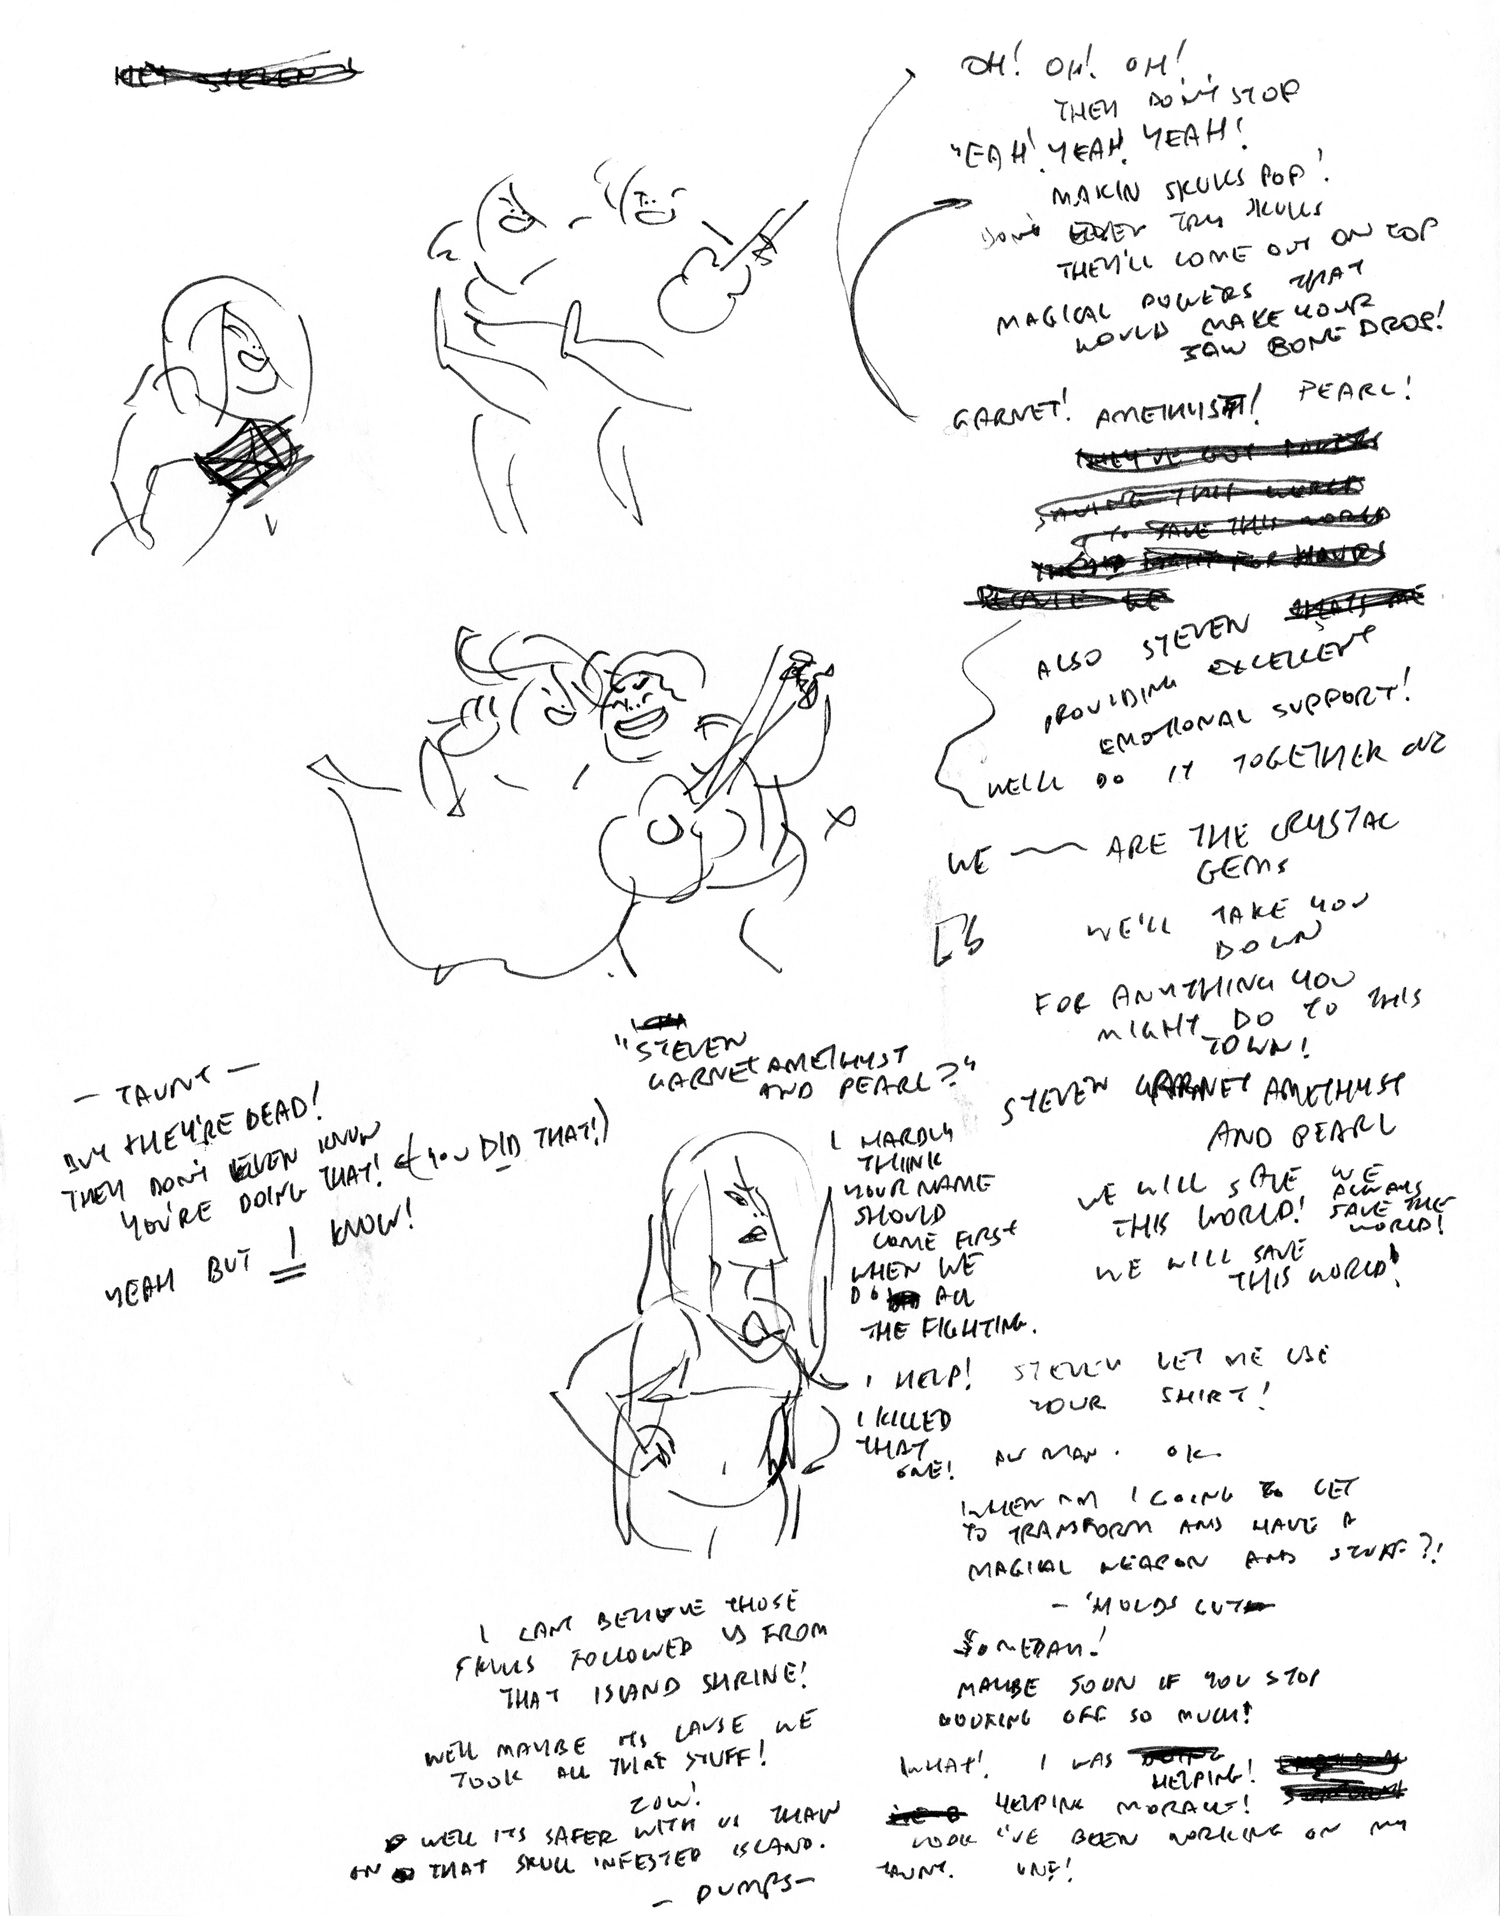 A Look Inside The Art Behind The Earliest Days Of Steven Universe